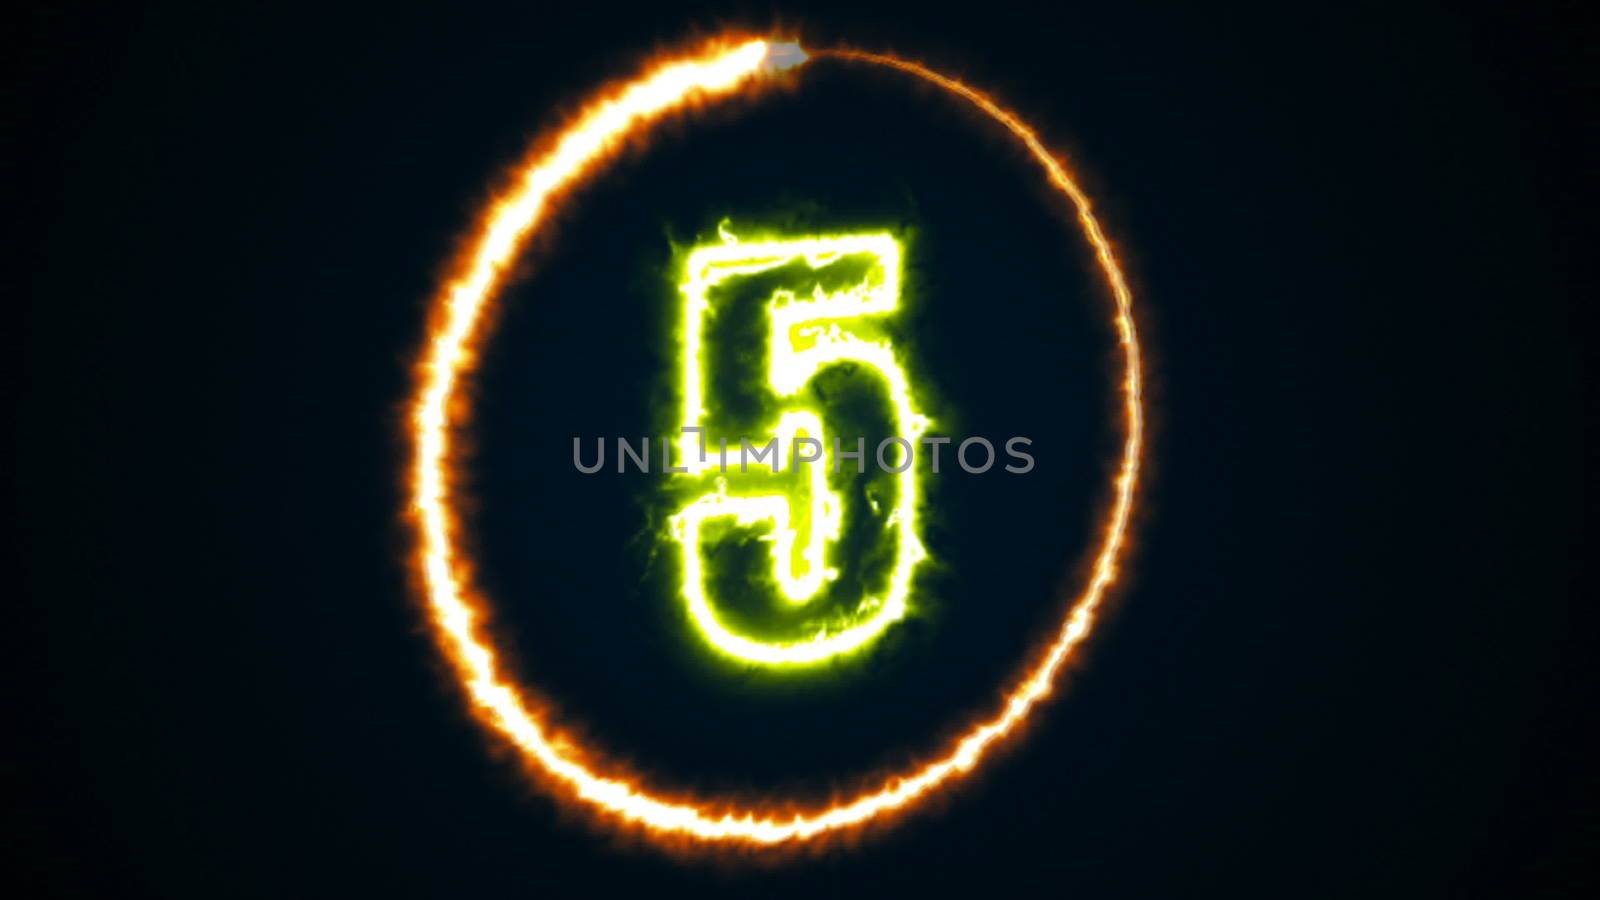 Abstract background with energy number. Digital 3d rendering. Isolated digital sign on a black background